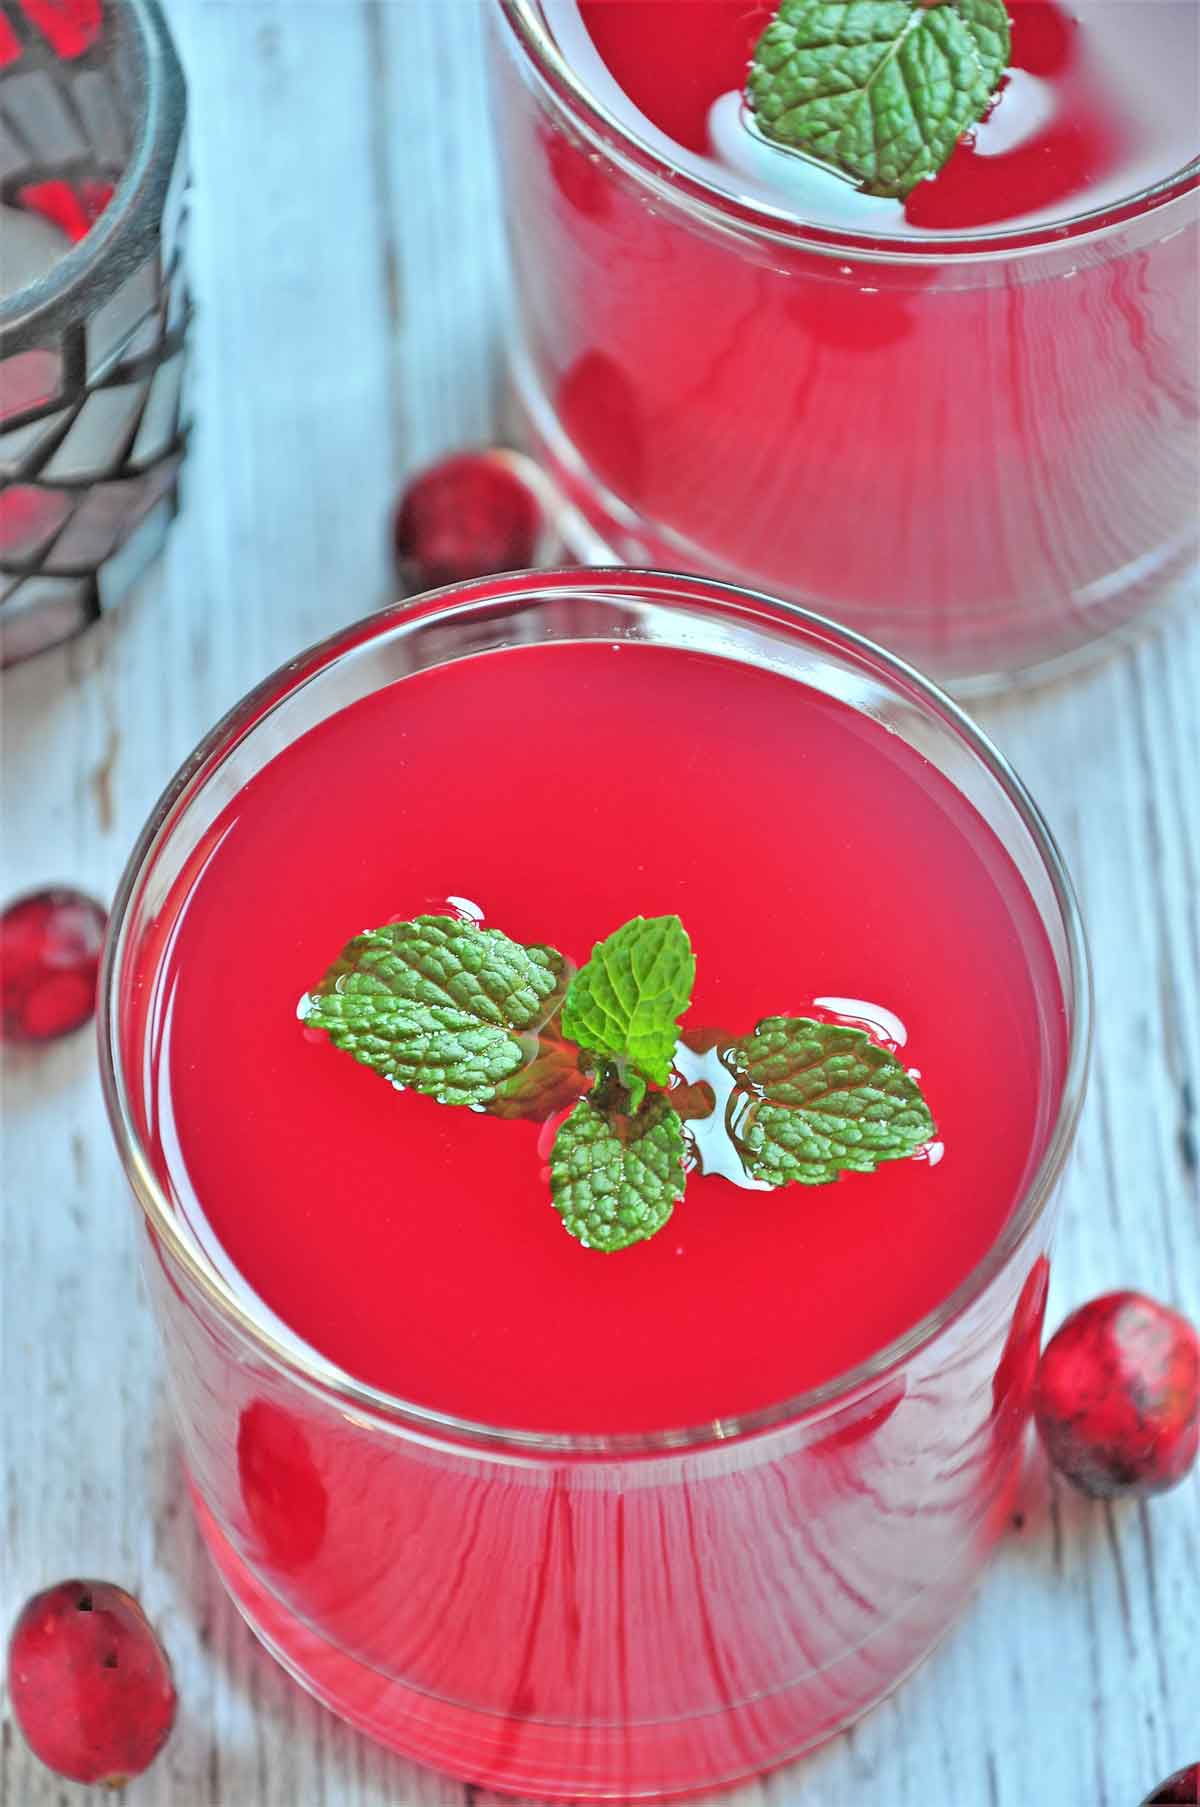 Cranberry juice in a glass and garnished with few mint leaves.